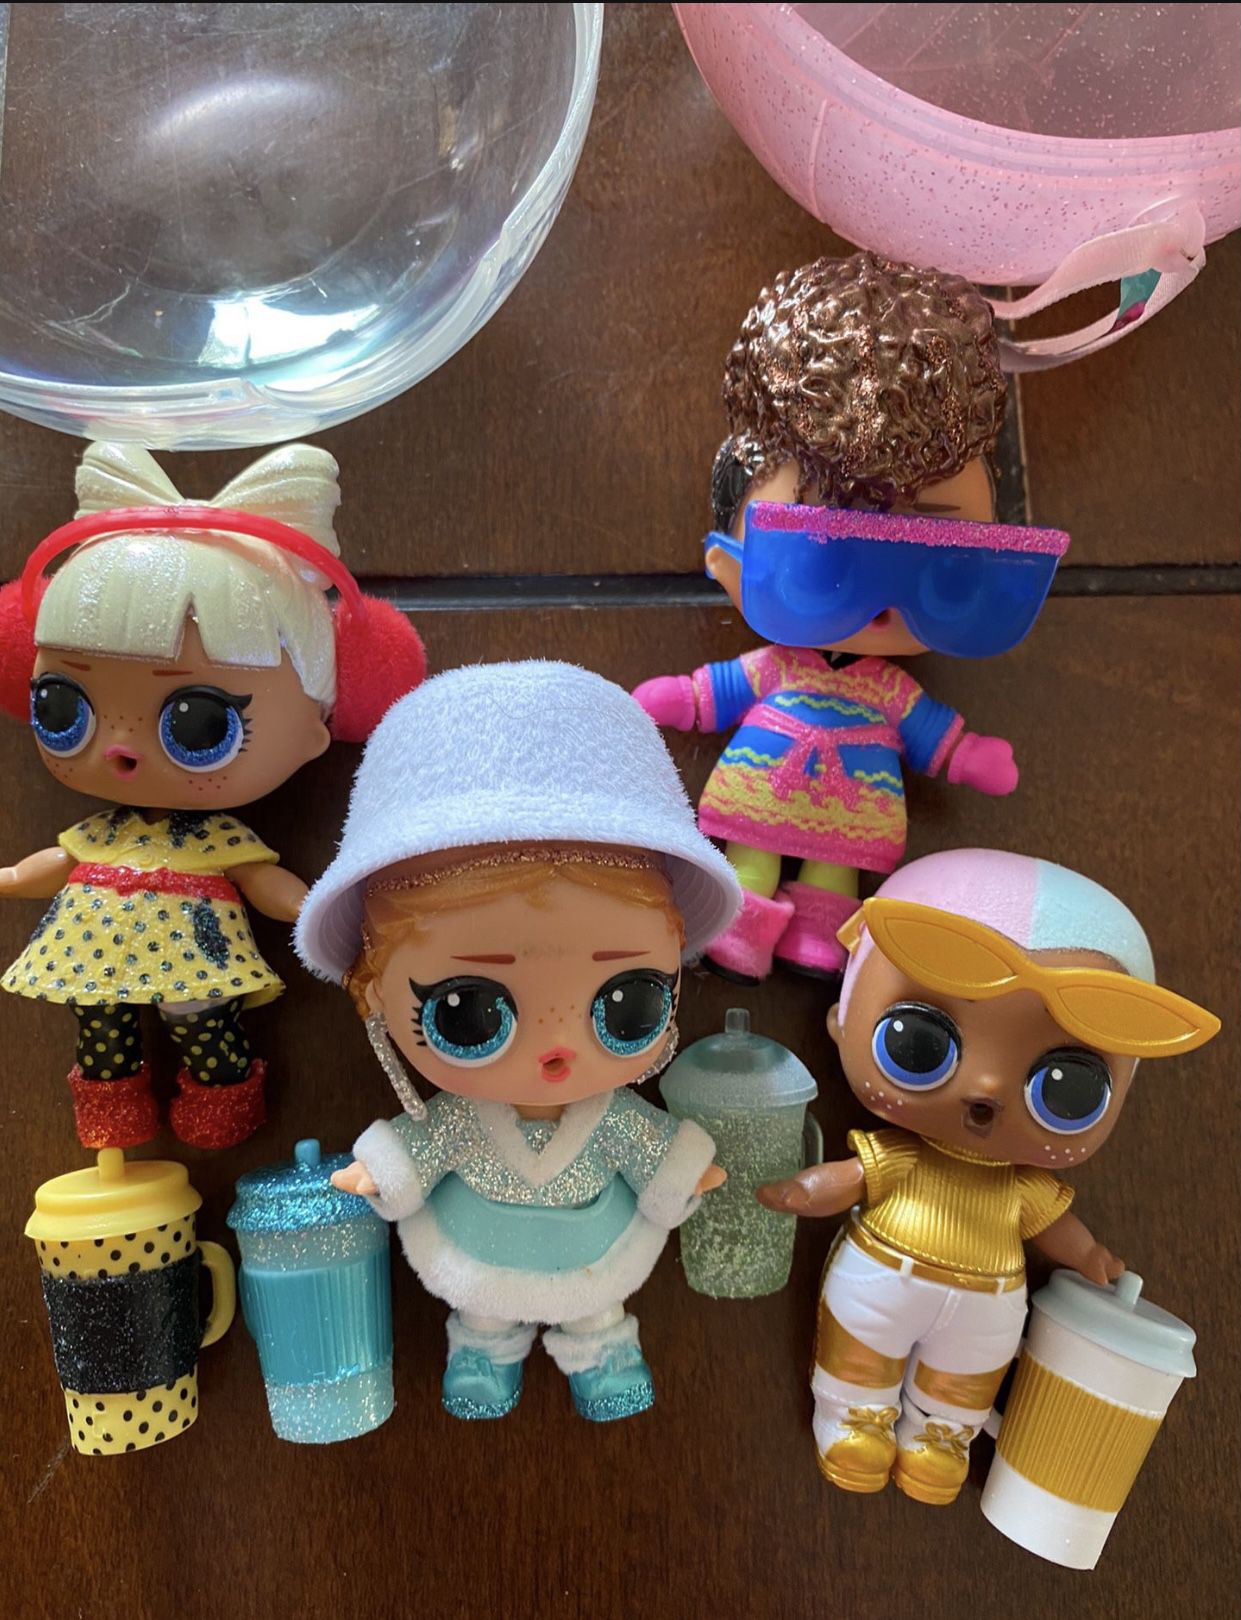 New LOL Dolls $30 For All Or Each For $10